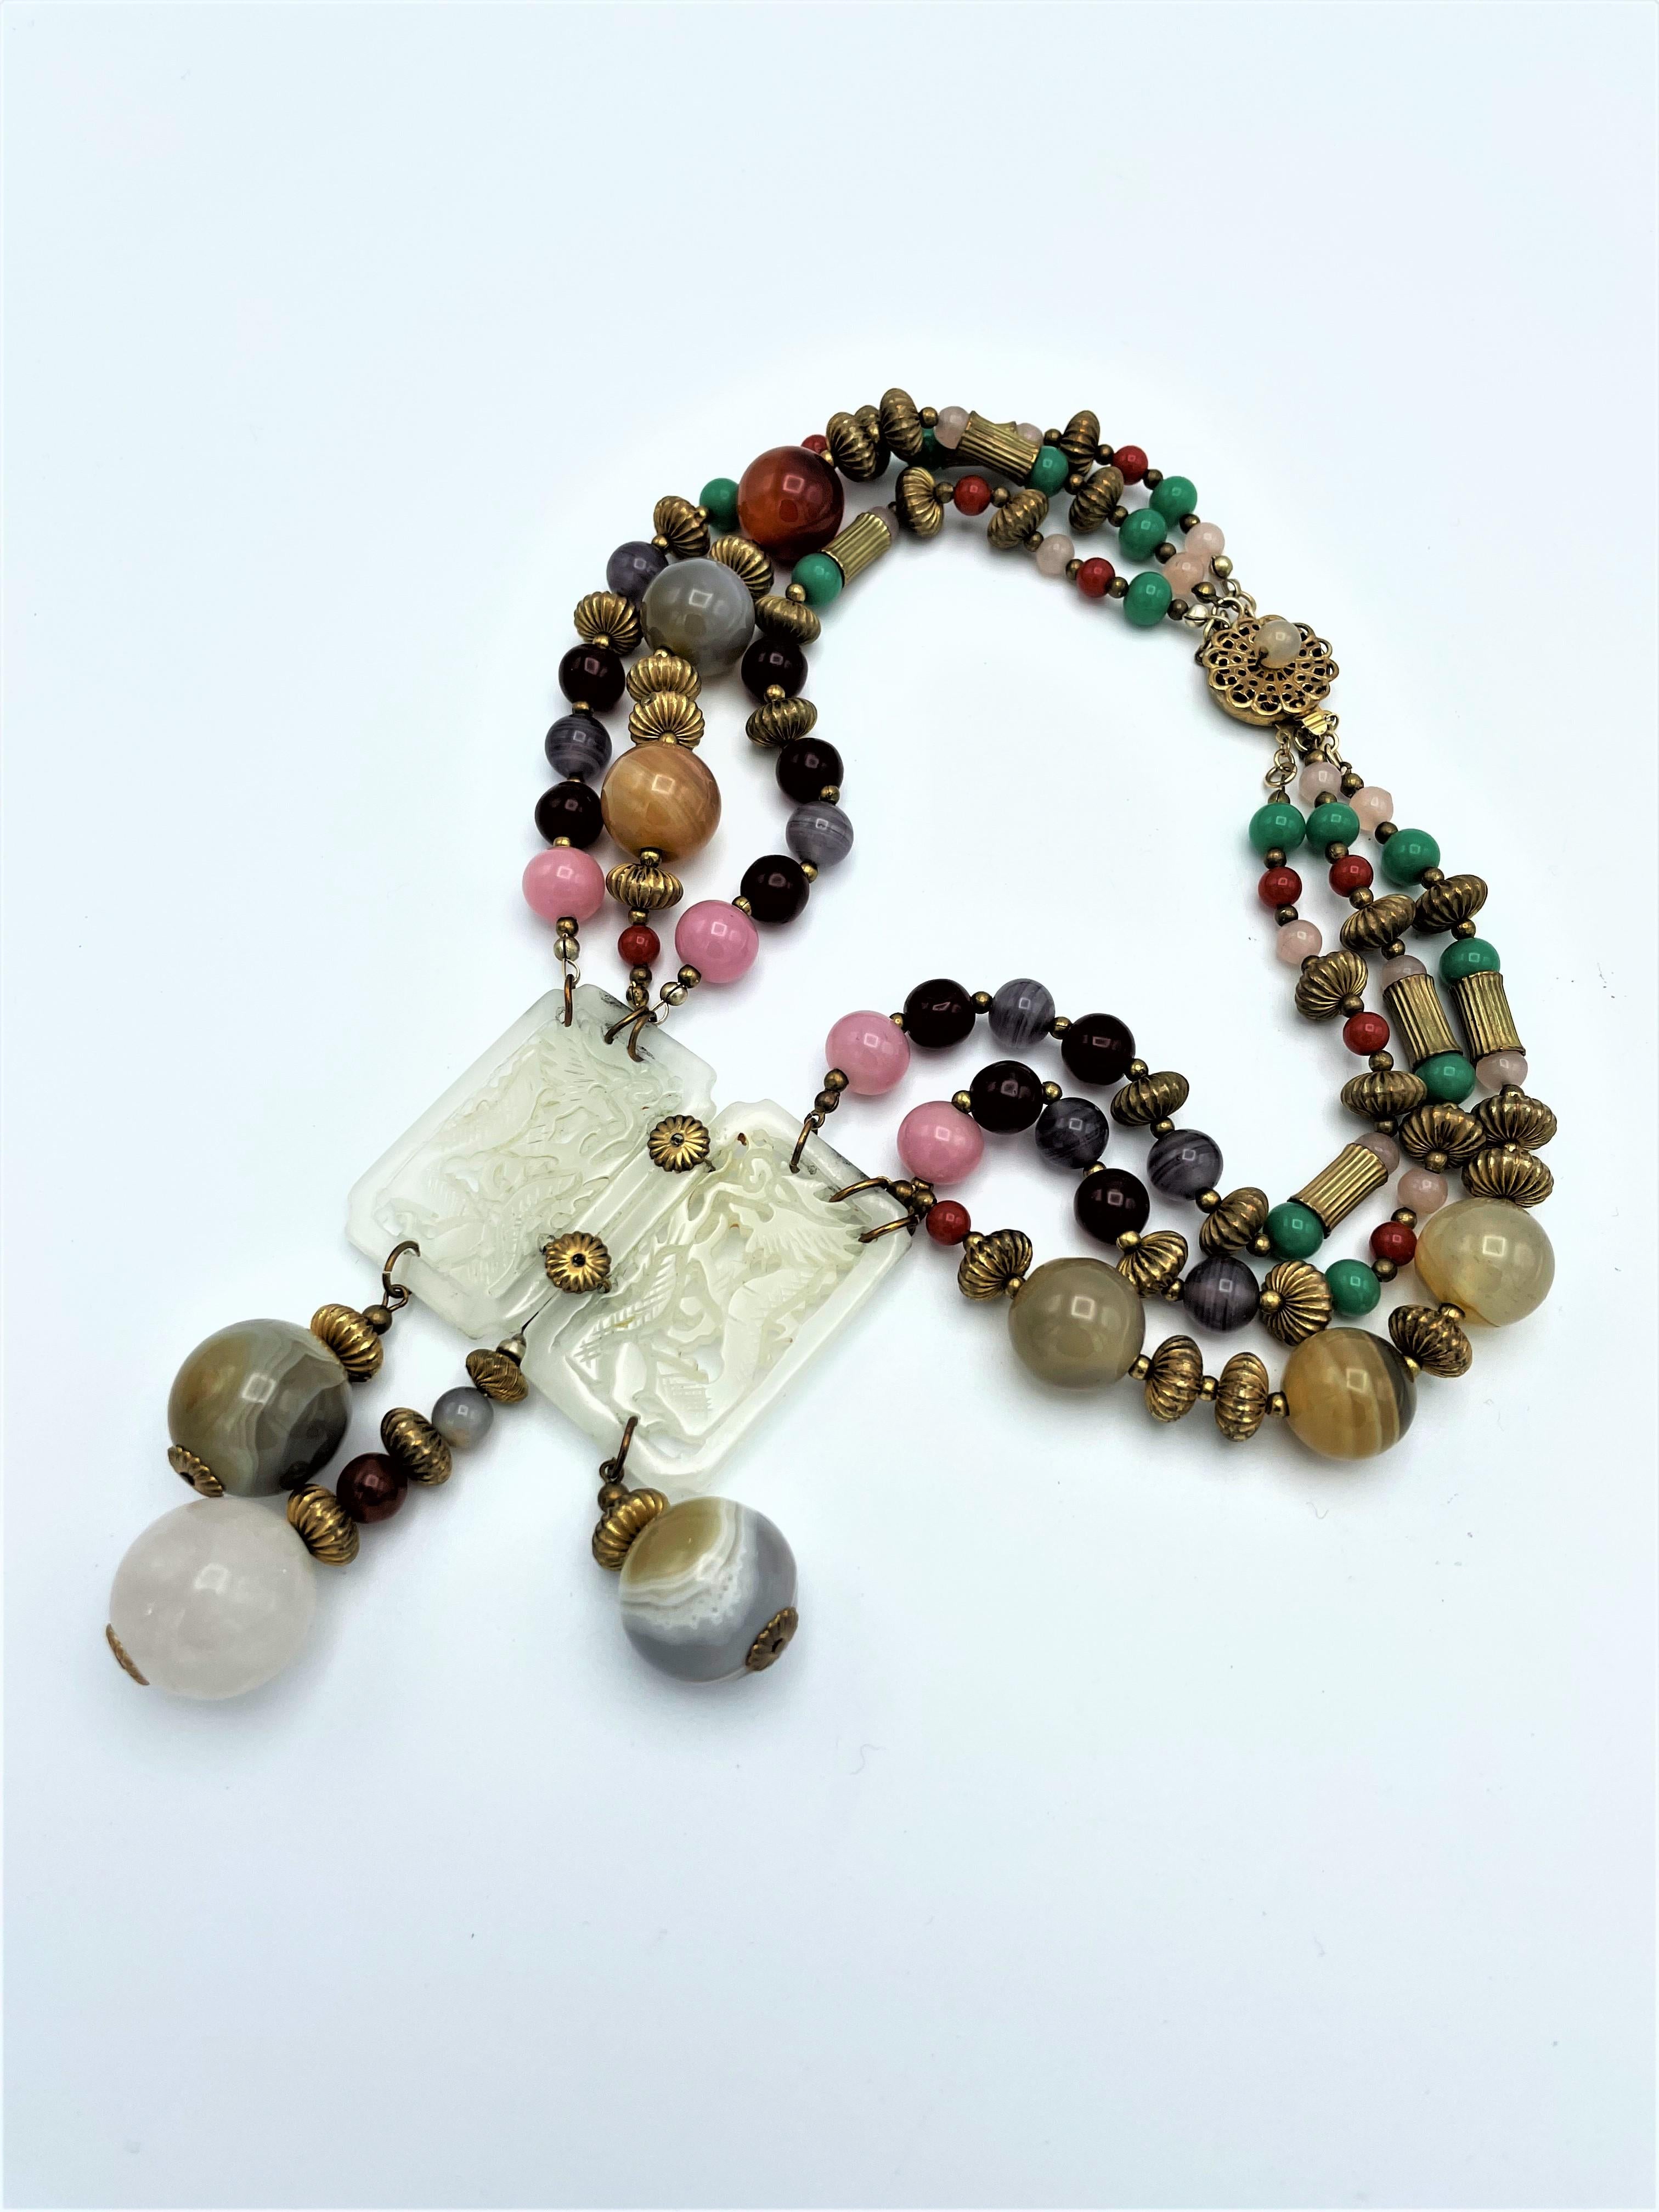 Vintage Miriam Haskell necklace, agate and glass beads, jade similar  1950s USA For Sale 1